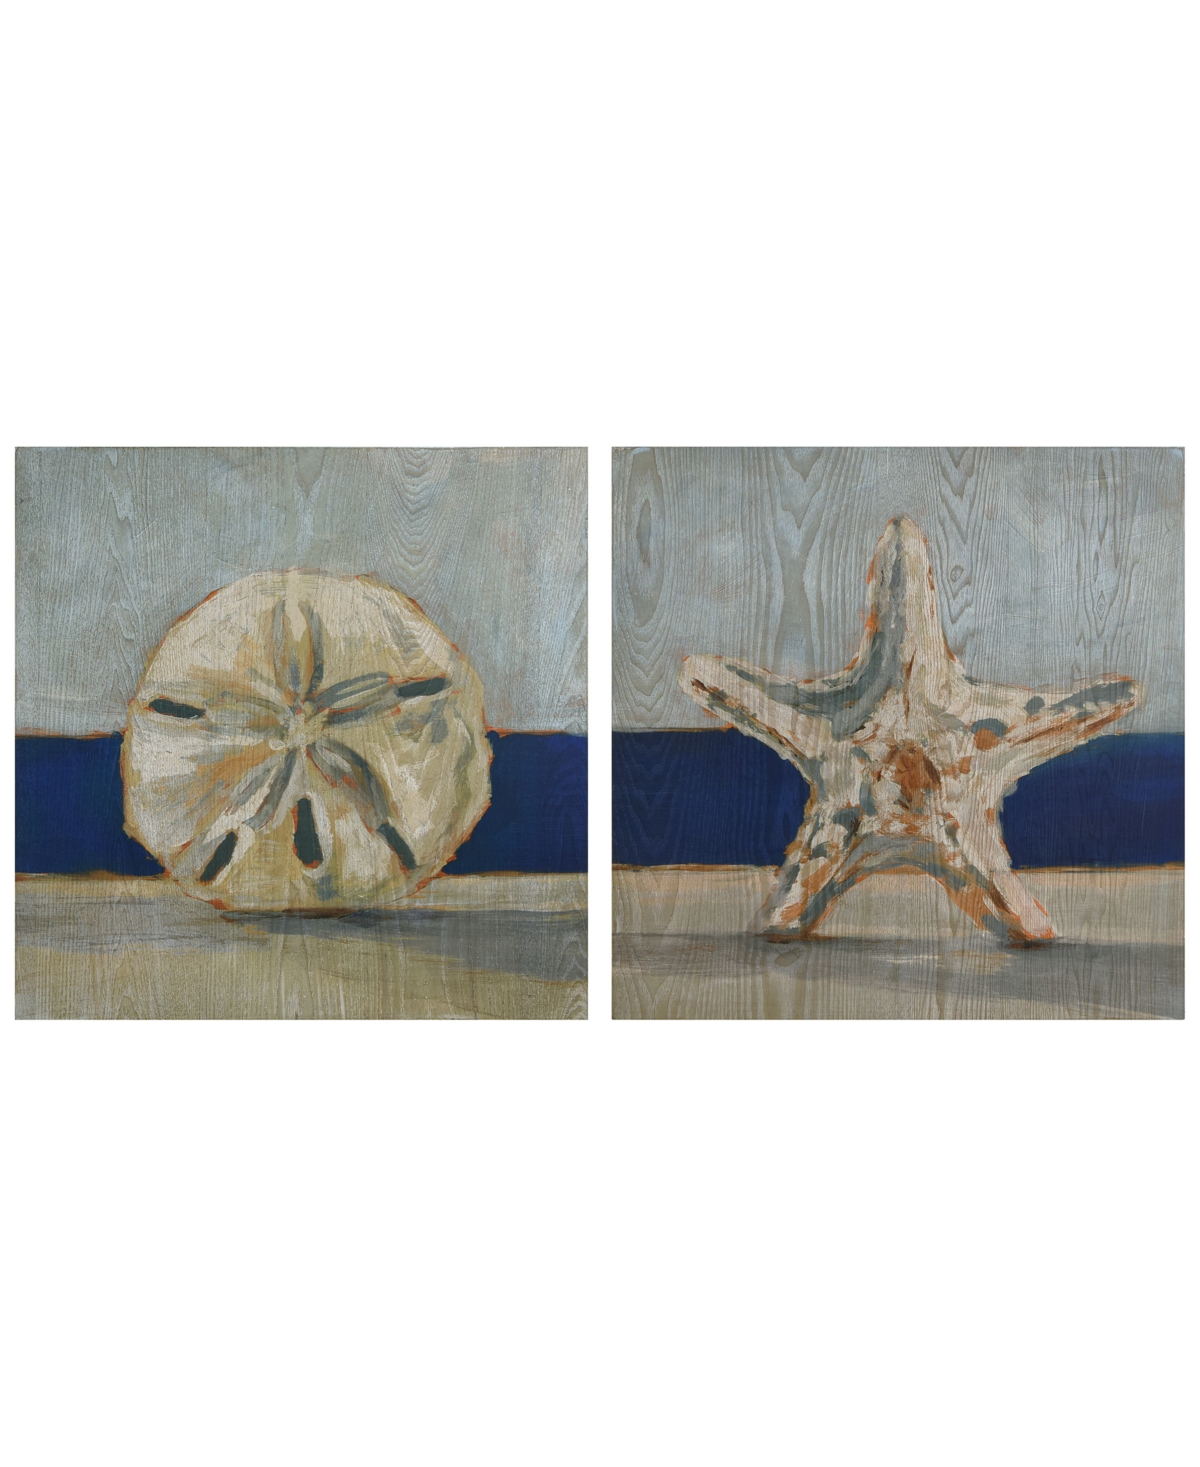 Empire Art Direct "conch Star Fish By The Sea" Fine Giclee Printed Directly On Hand Finished Ash Wood Wall Art Set Of In White,blue